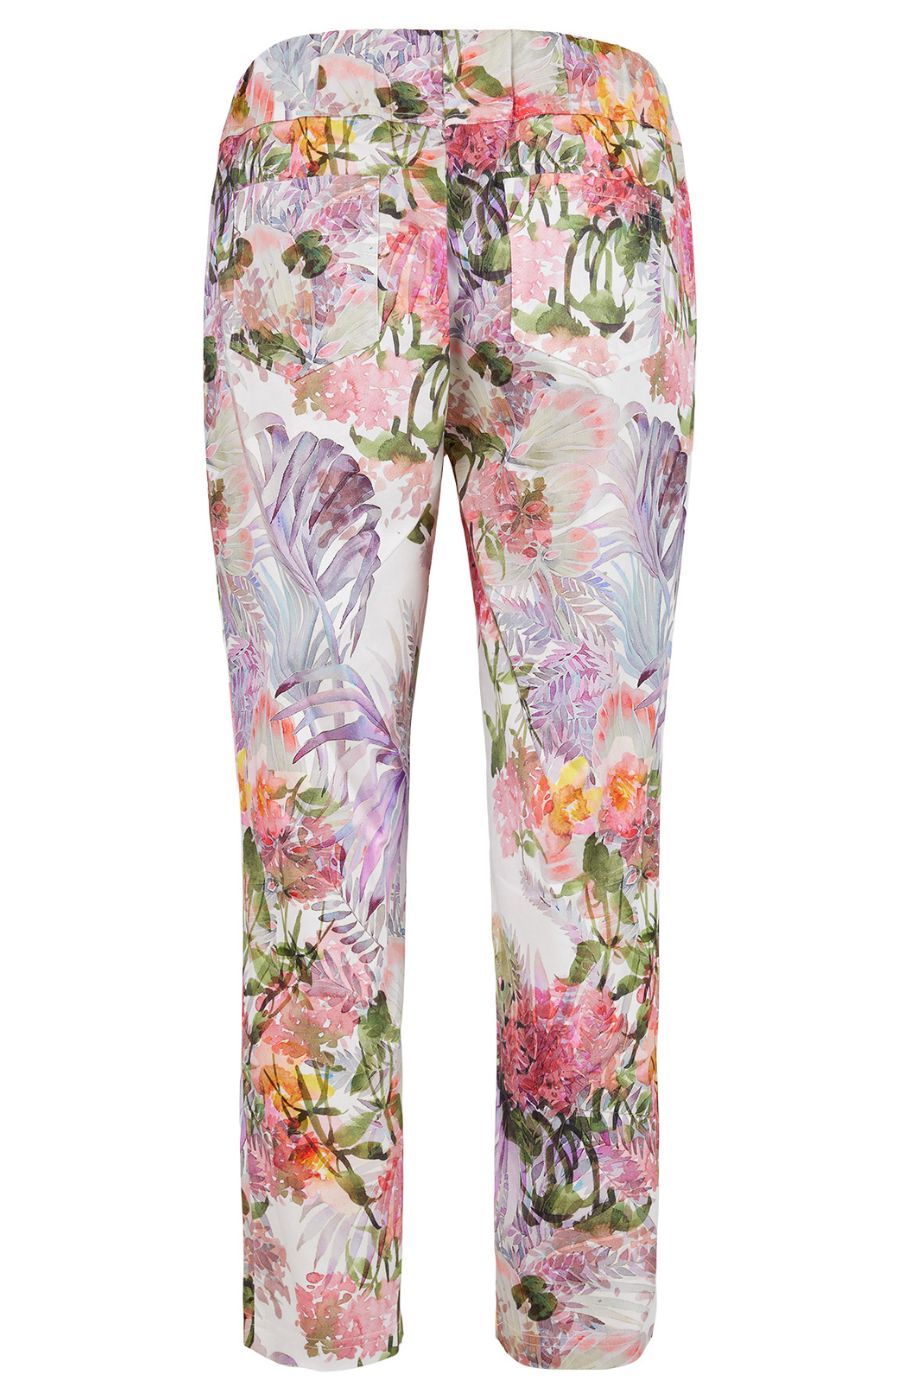 Robell 7/8ths Trousers in White Flower Print